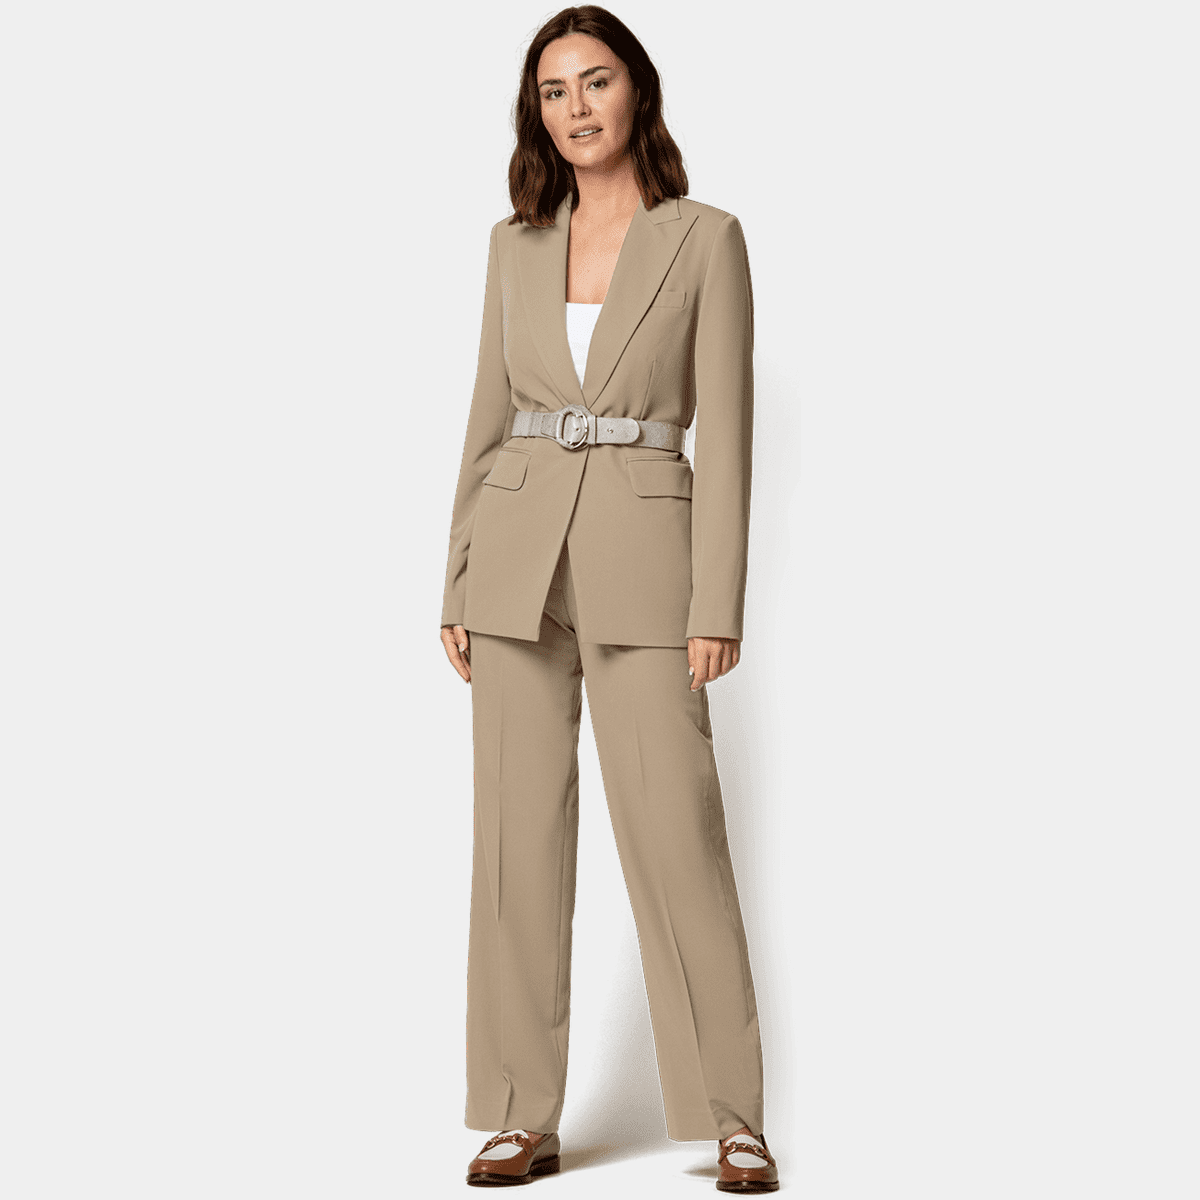 Blue double breasted Wide Leg Pant Suit - relaxed fit